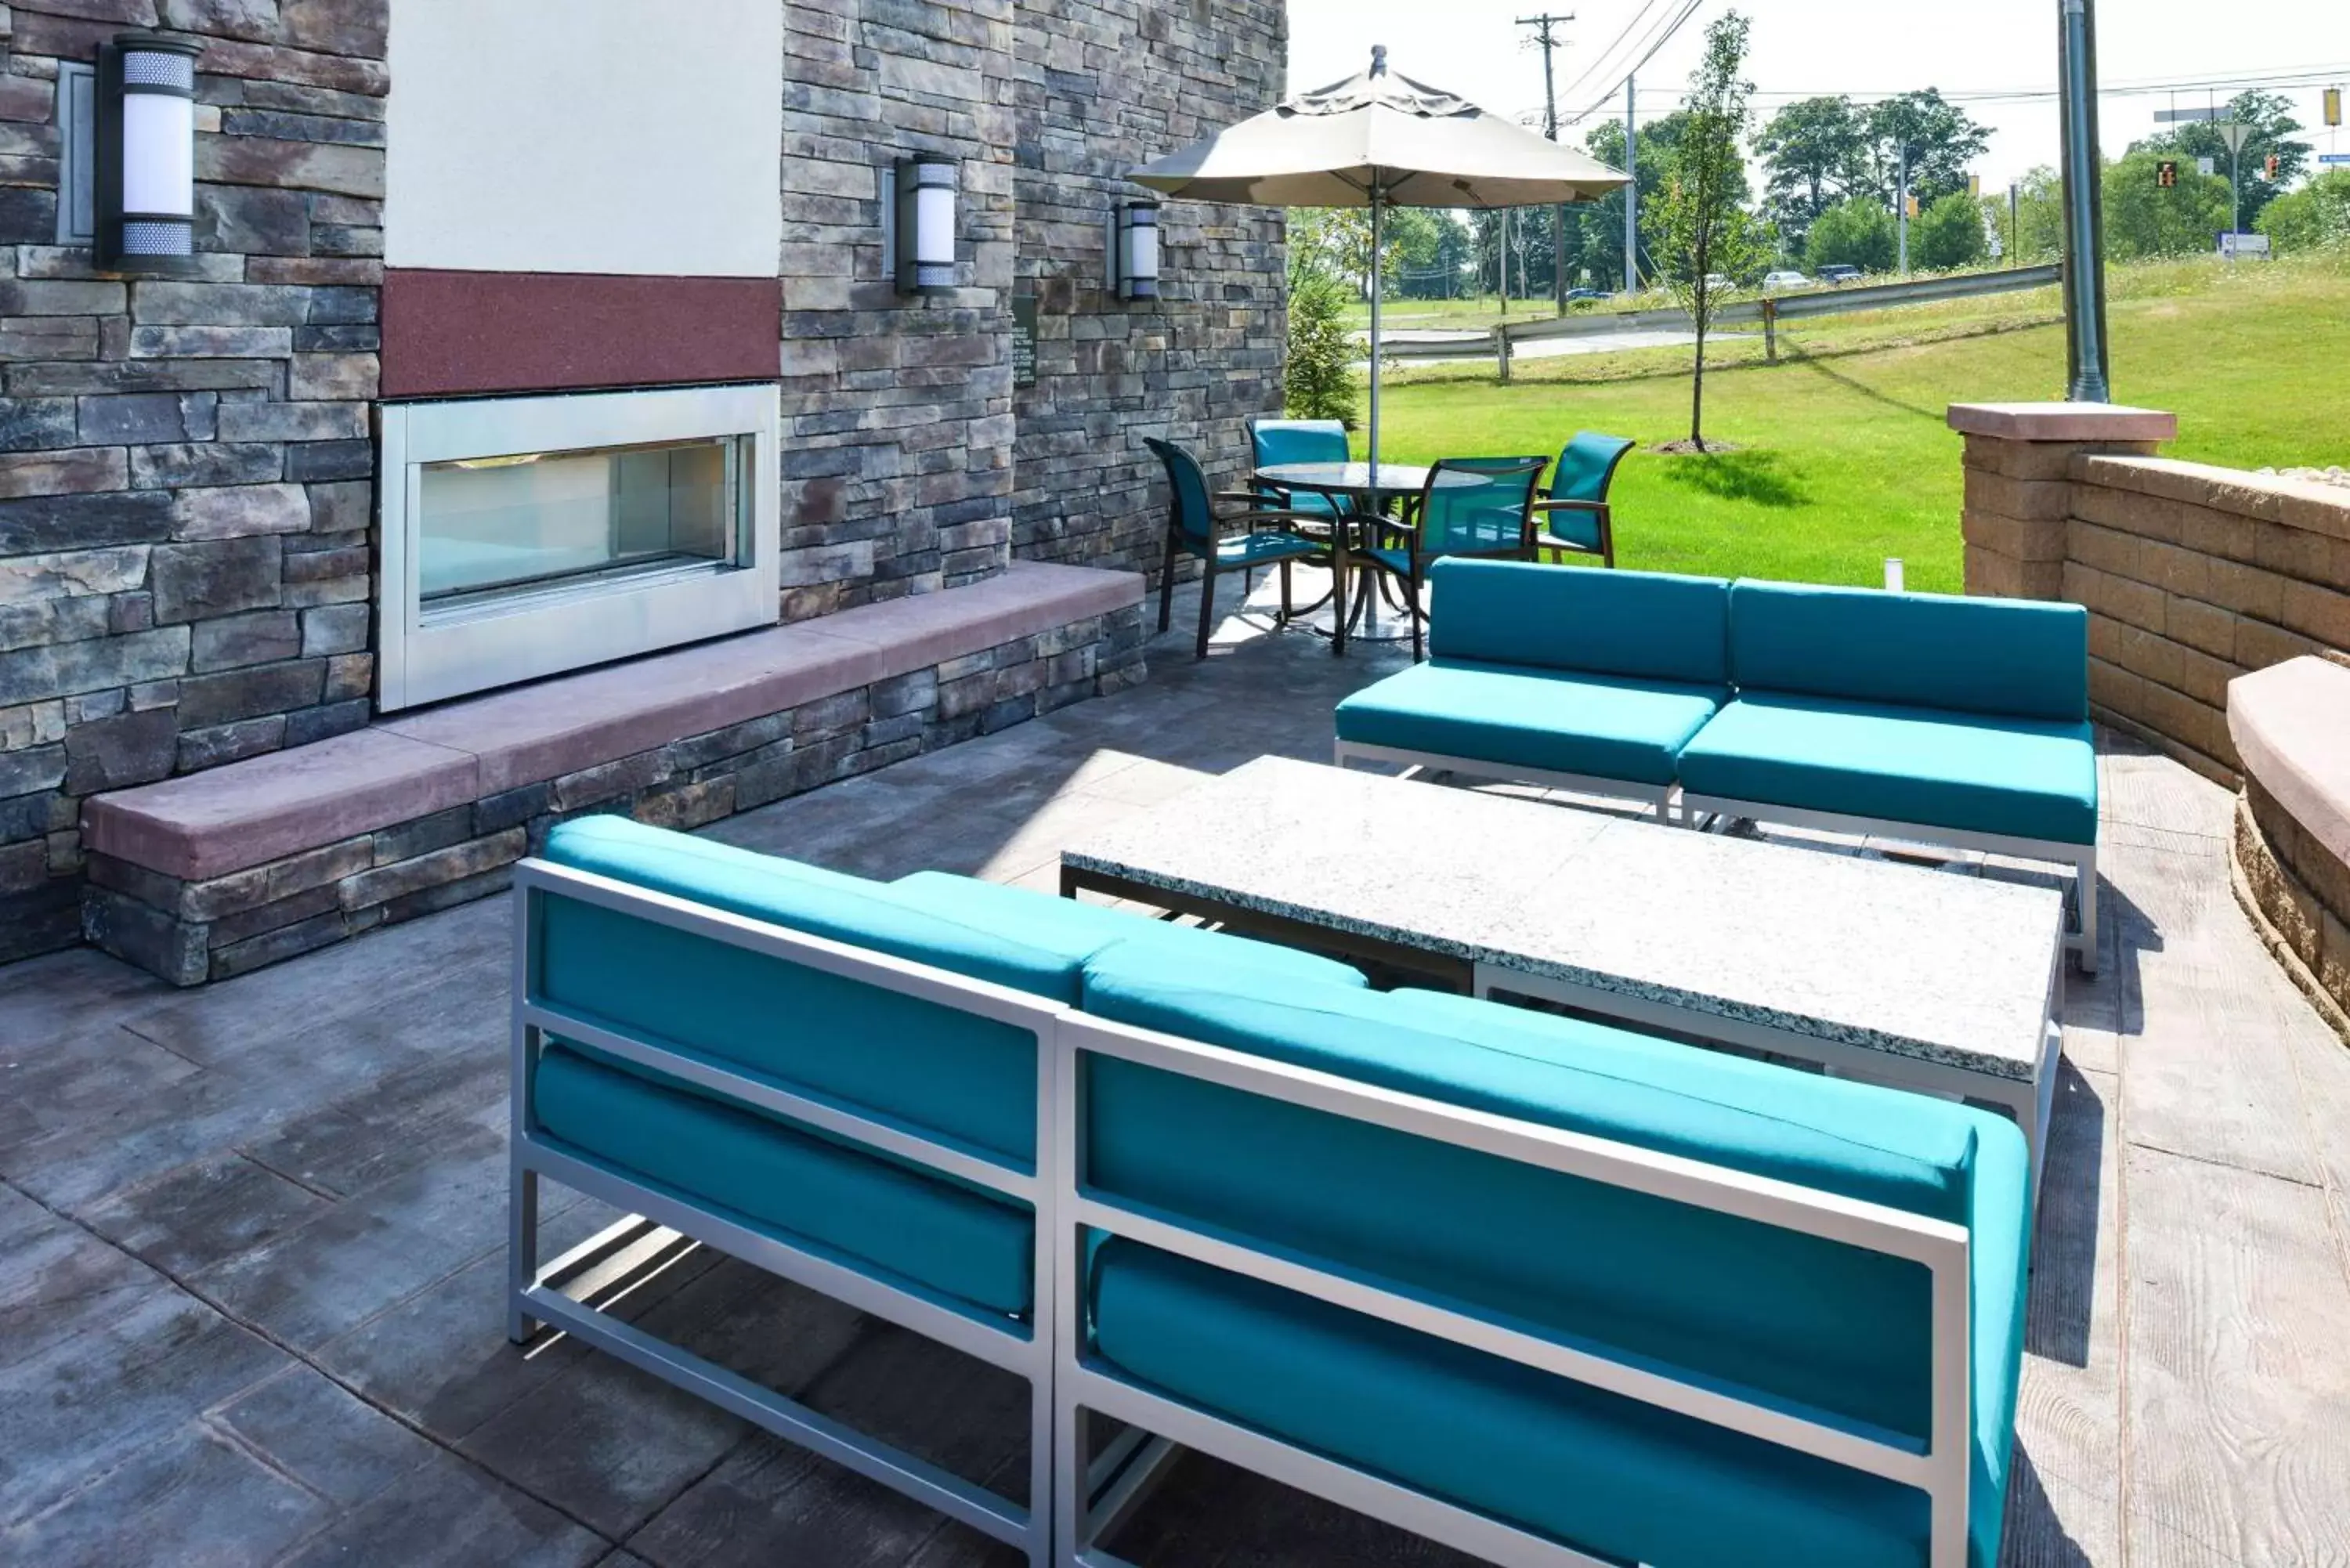 Patio in Hampton Inn Pittsburgh - Wexford - Cranberry South